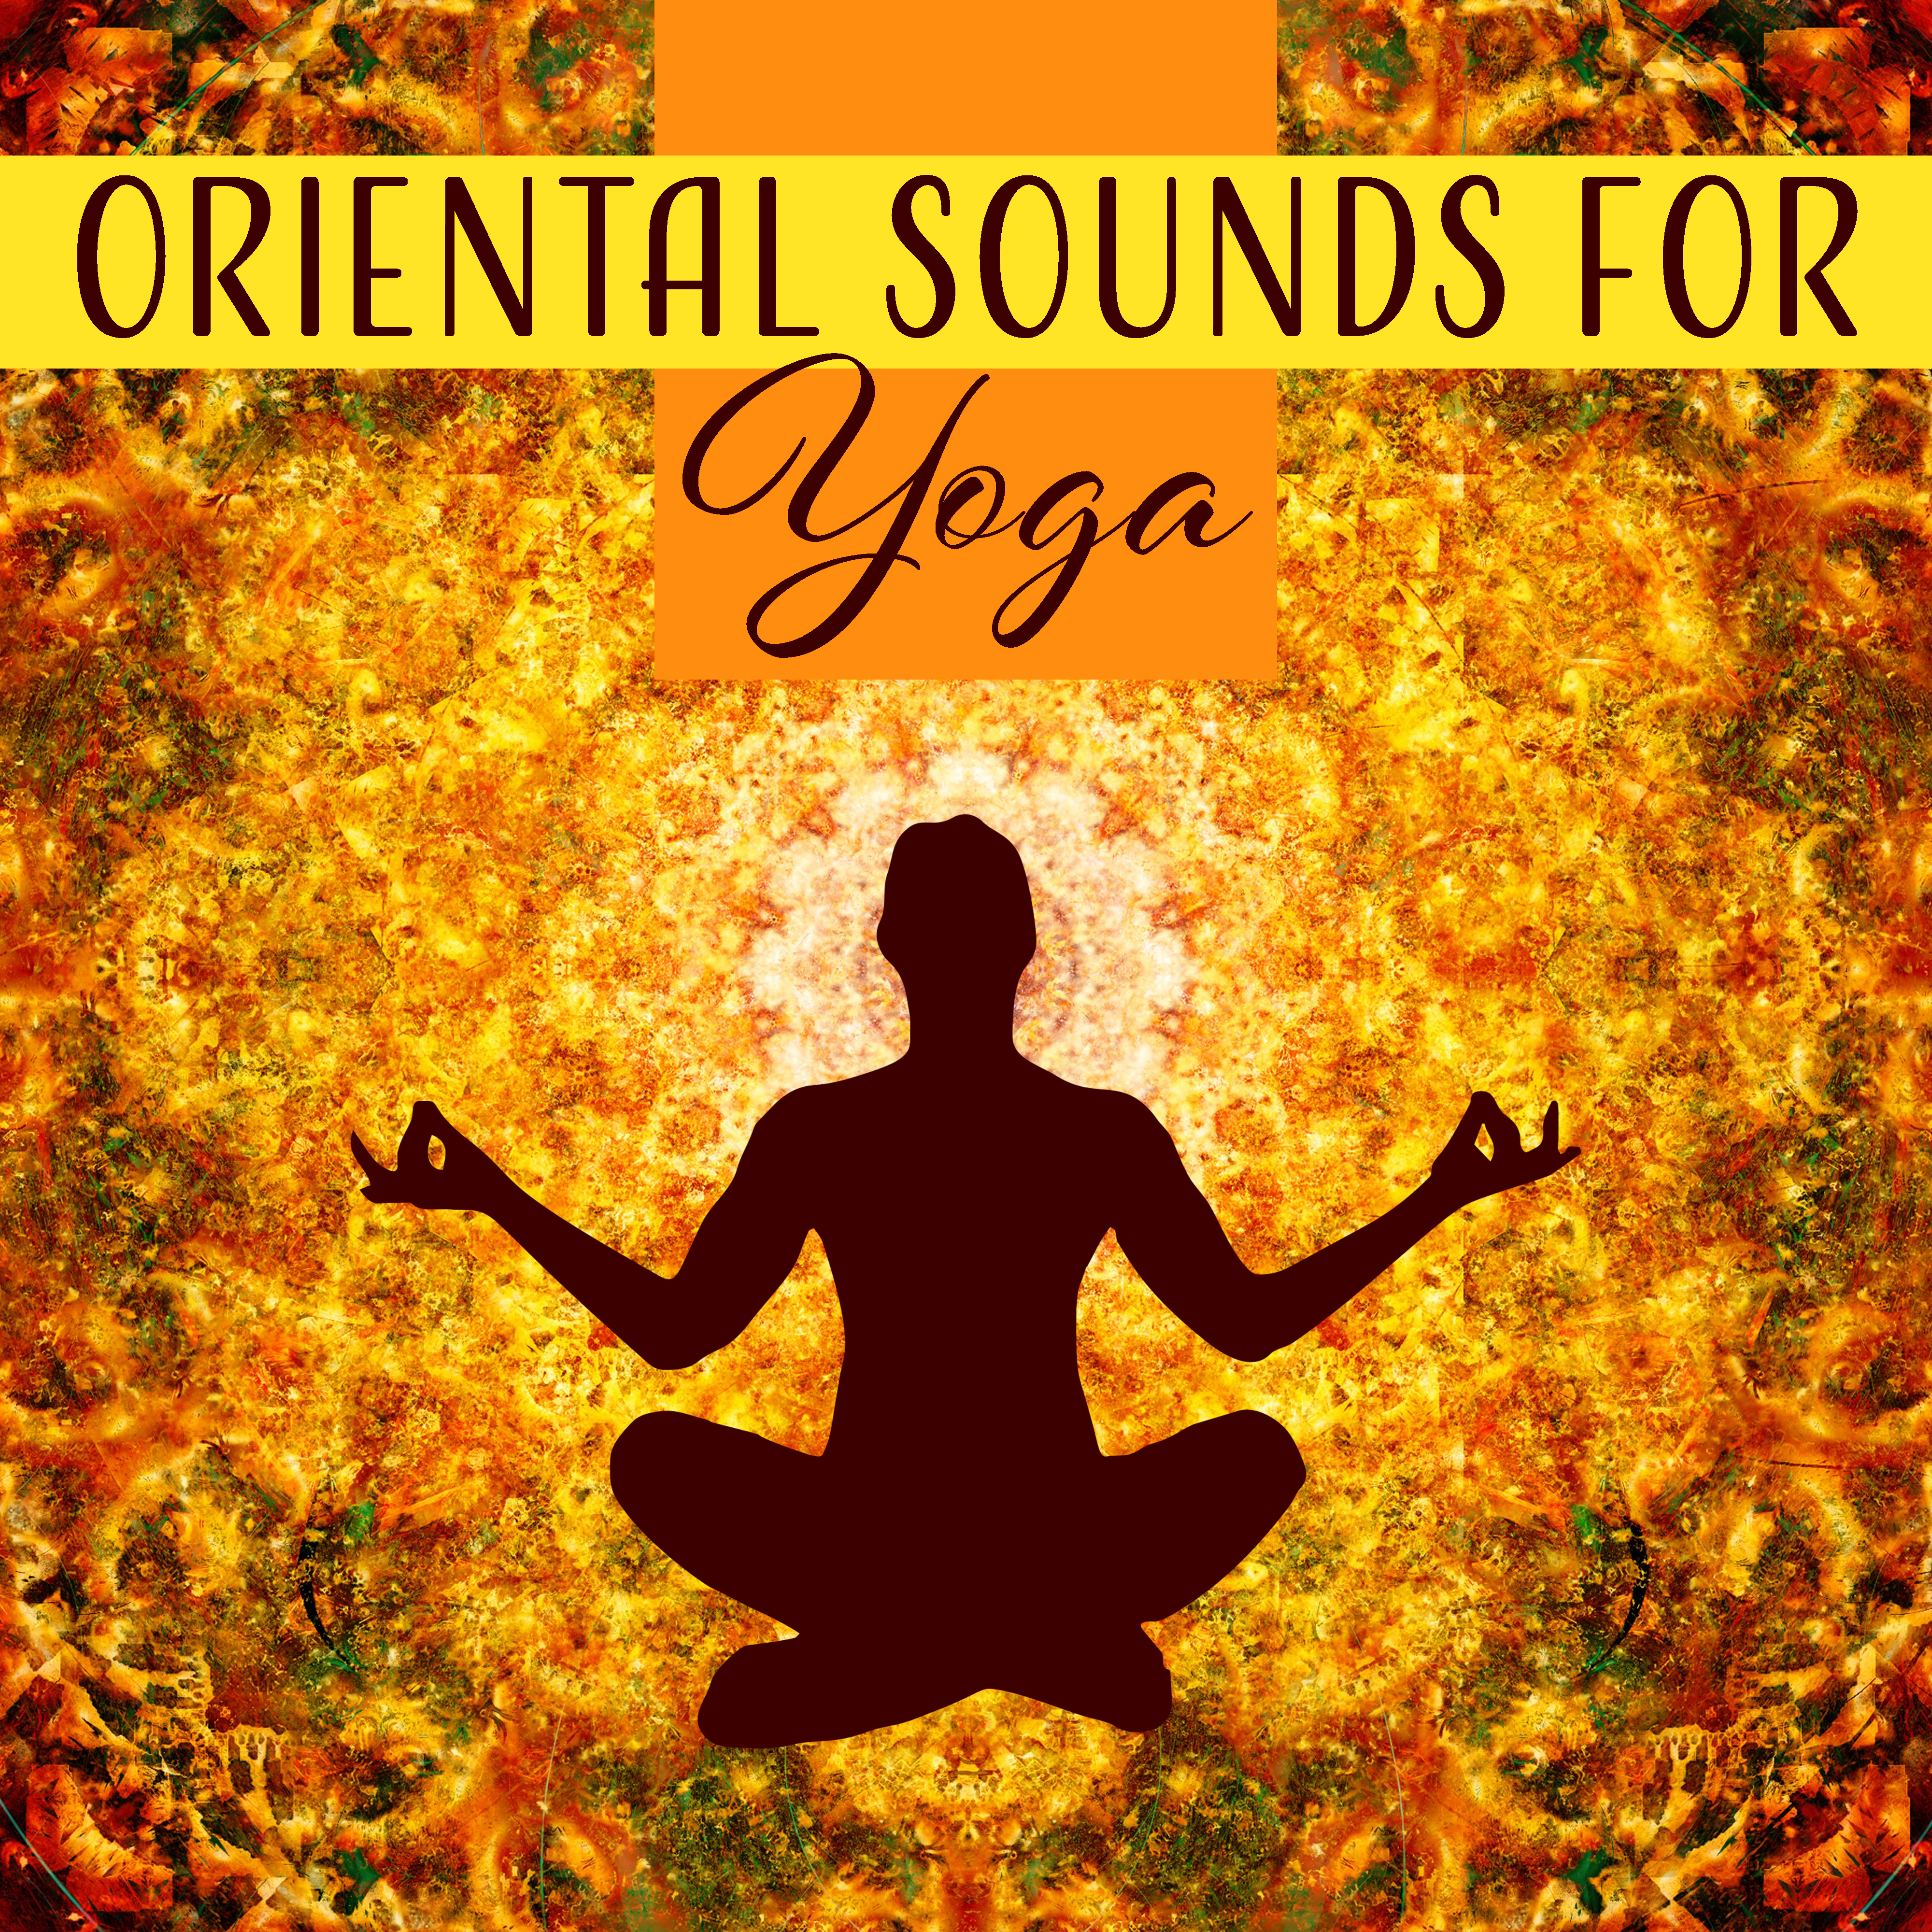 Oriental Sounds for Yoga  Deep Meditation, Peaceful Music for Relaxation, Nature Sounds, Zen Music, Mantra, Spirituality